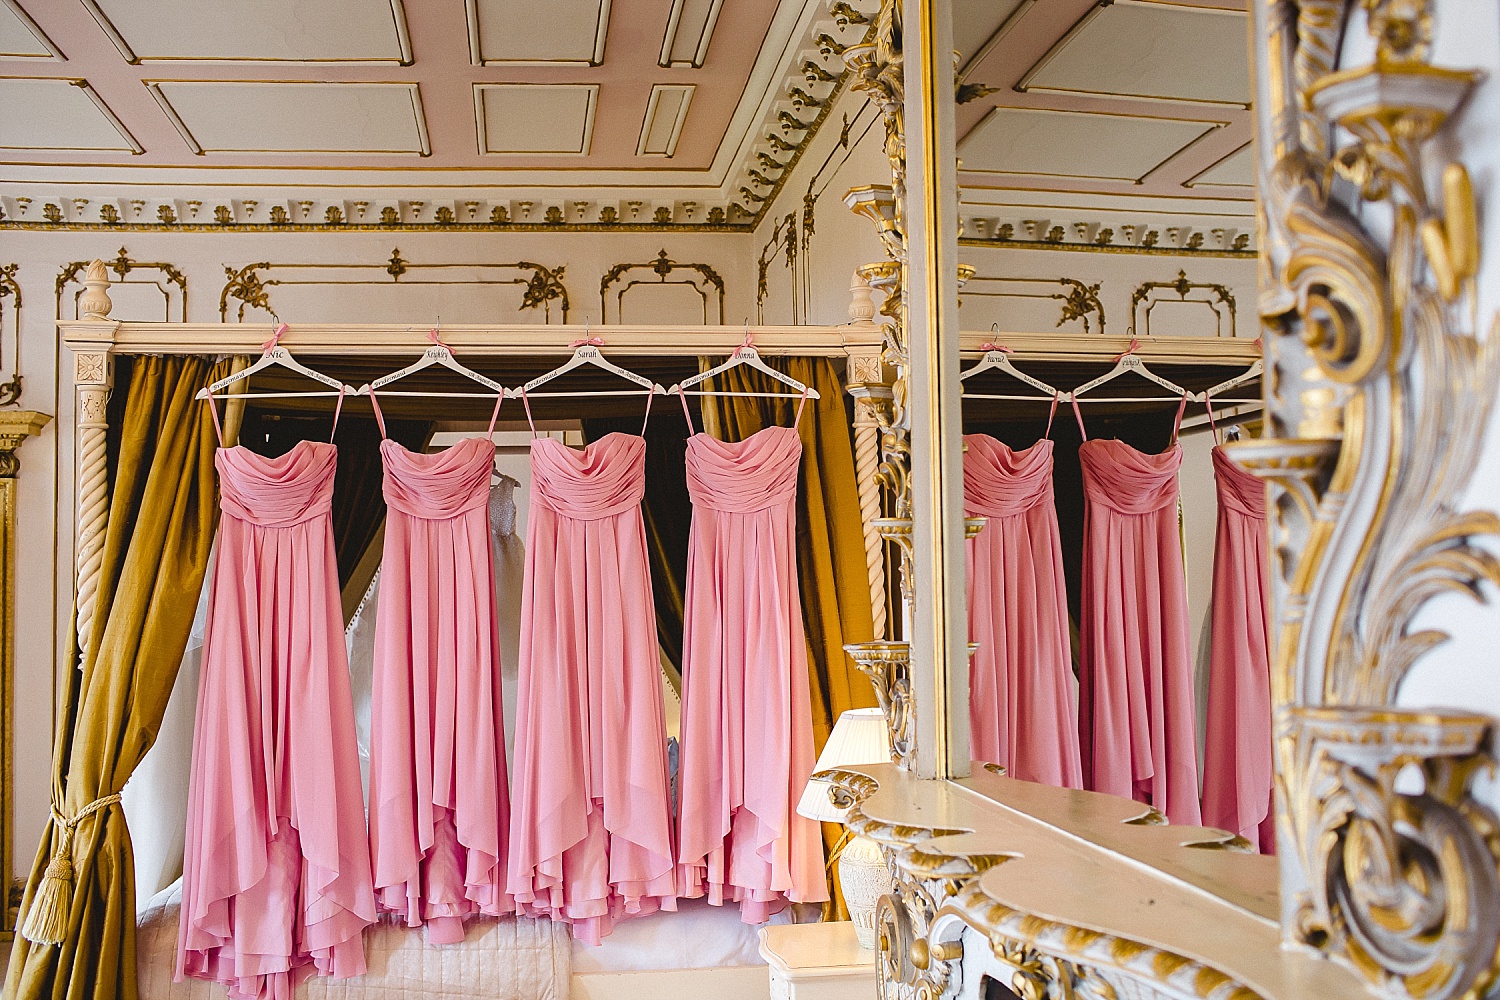 Gosfield Hall Wedding Photographer - Bridesmaids dresses in the Bridal Suite